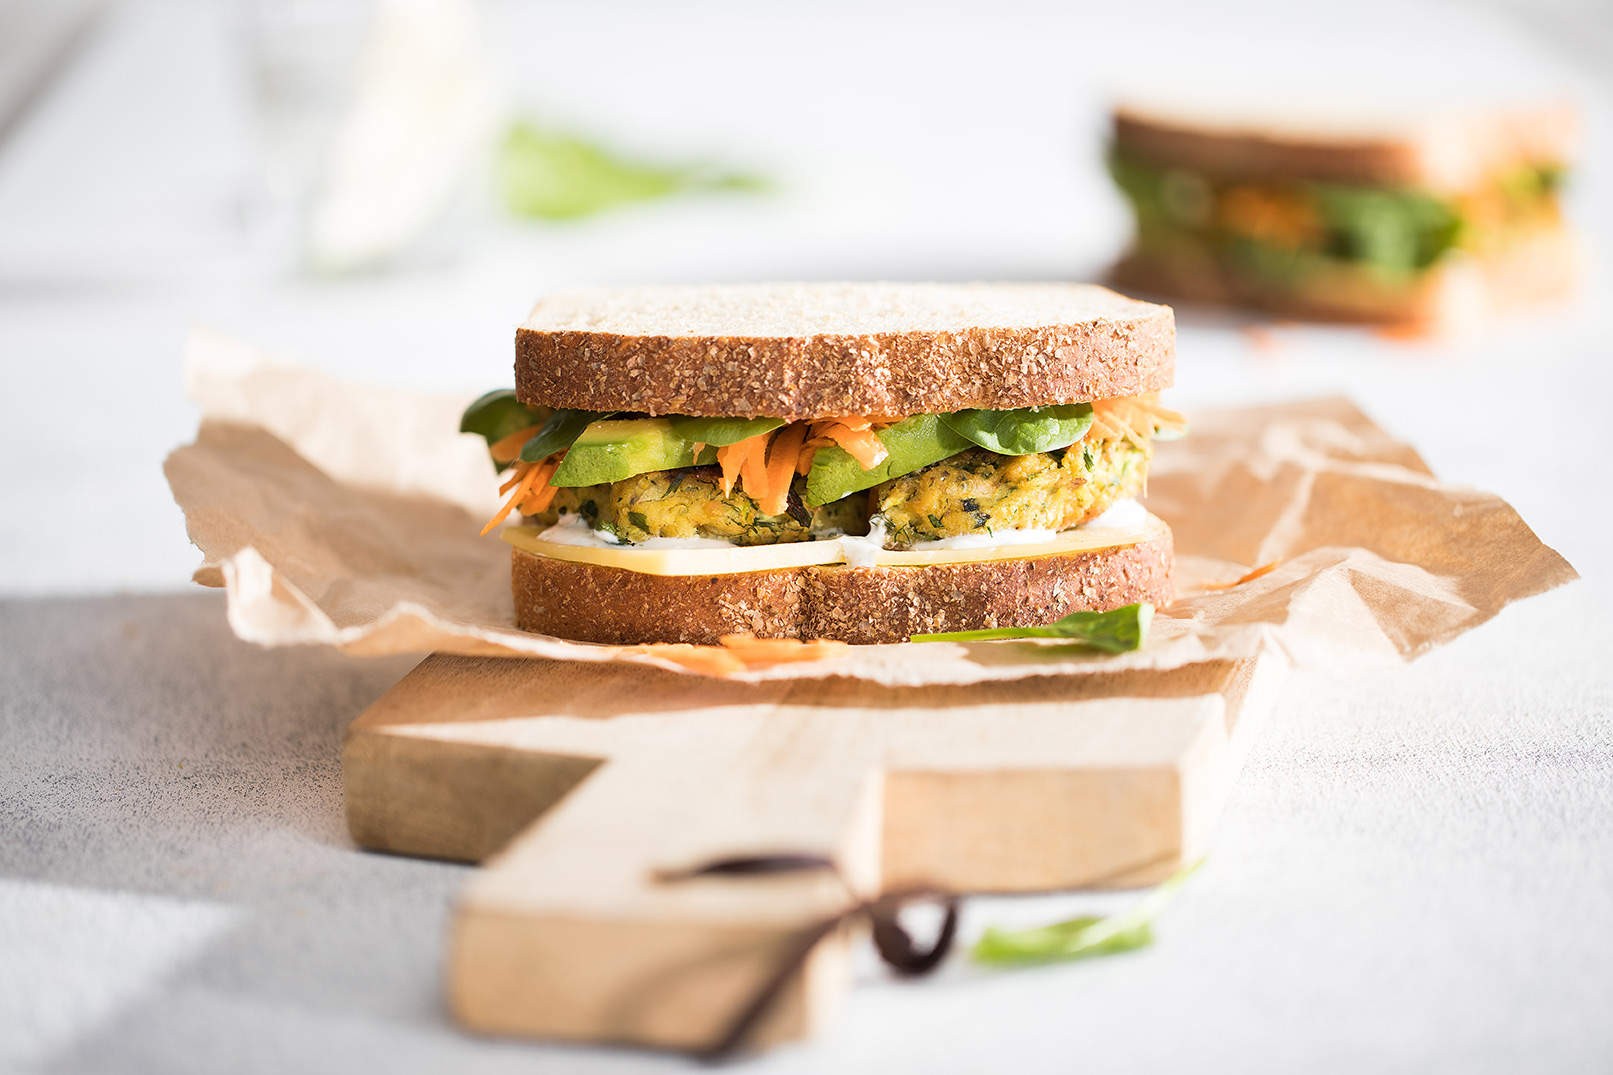 Image of a salmon pattie and avocado sandwich on baking paper served on a wooden cutting board with another sandwich in the background